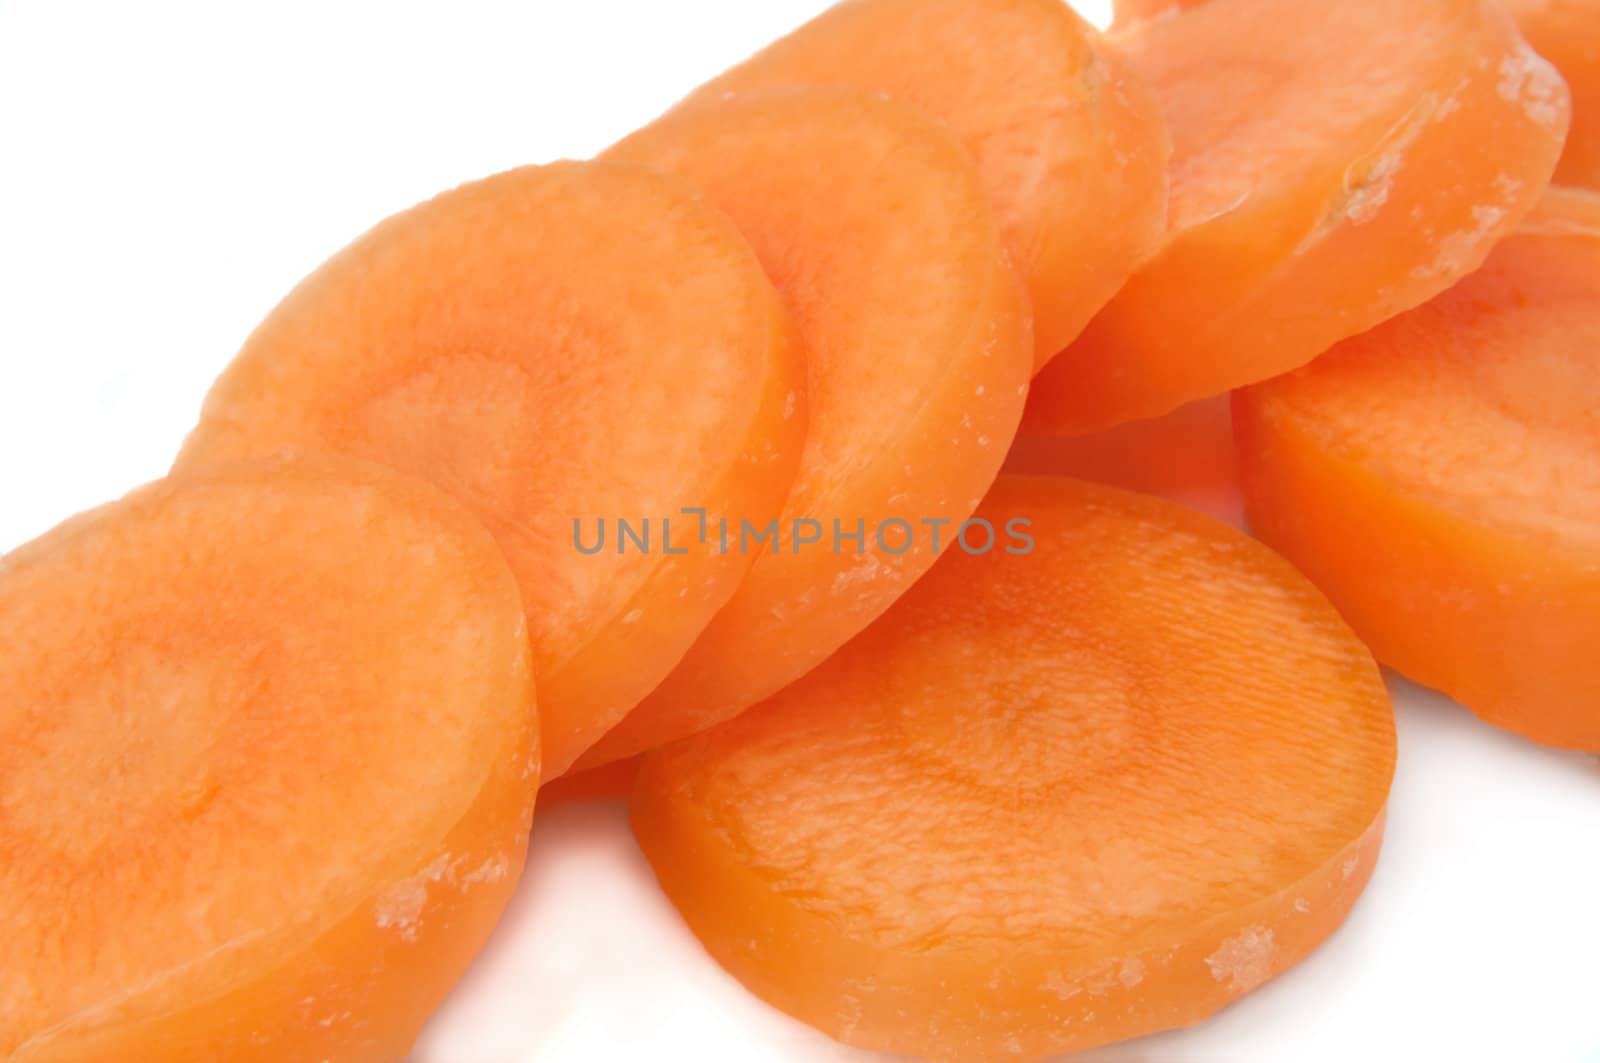 Close and low level angle capturing fresh carrot slices arranged over white.